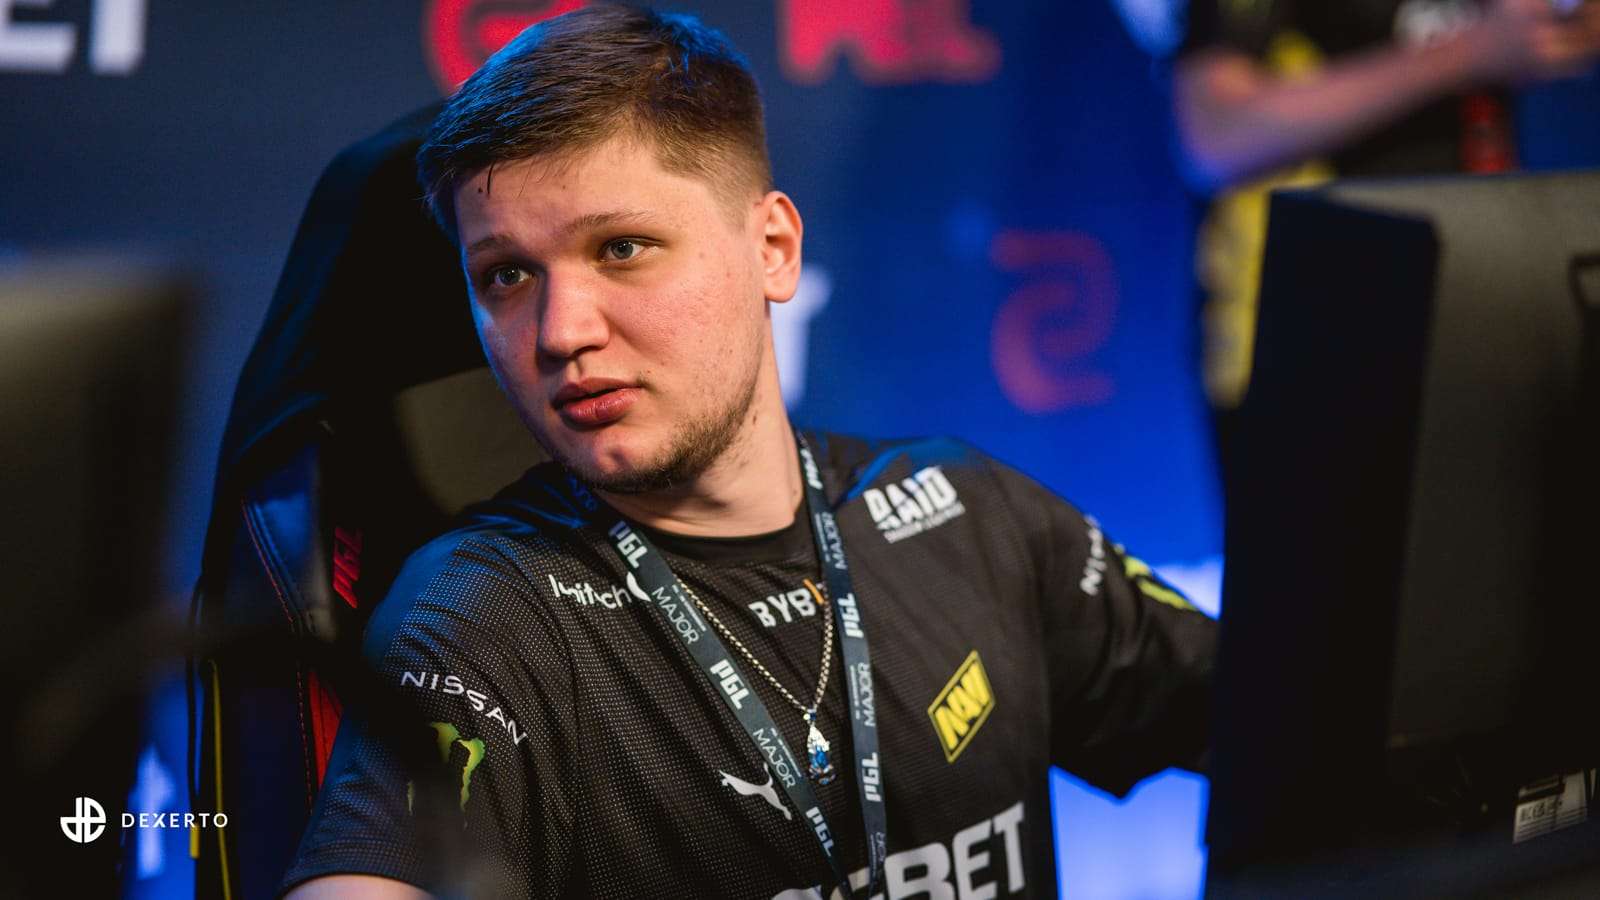 S1mple at csgo major